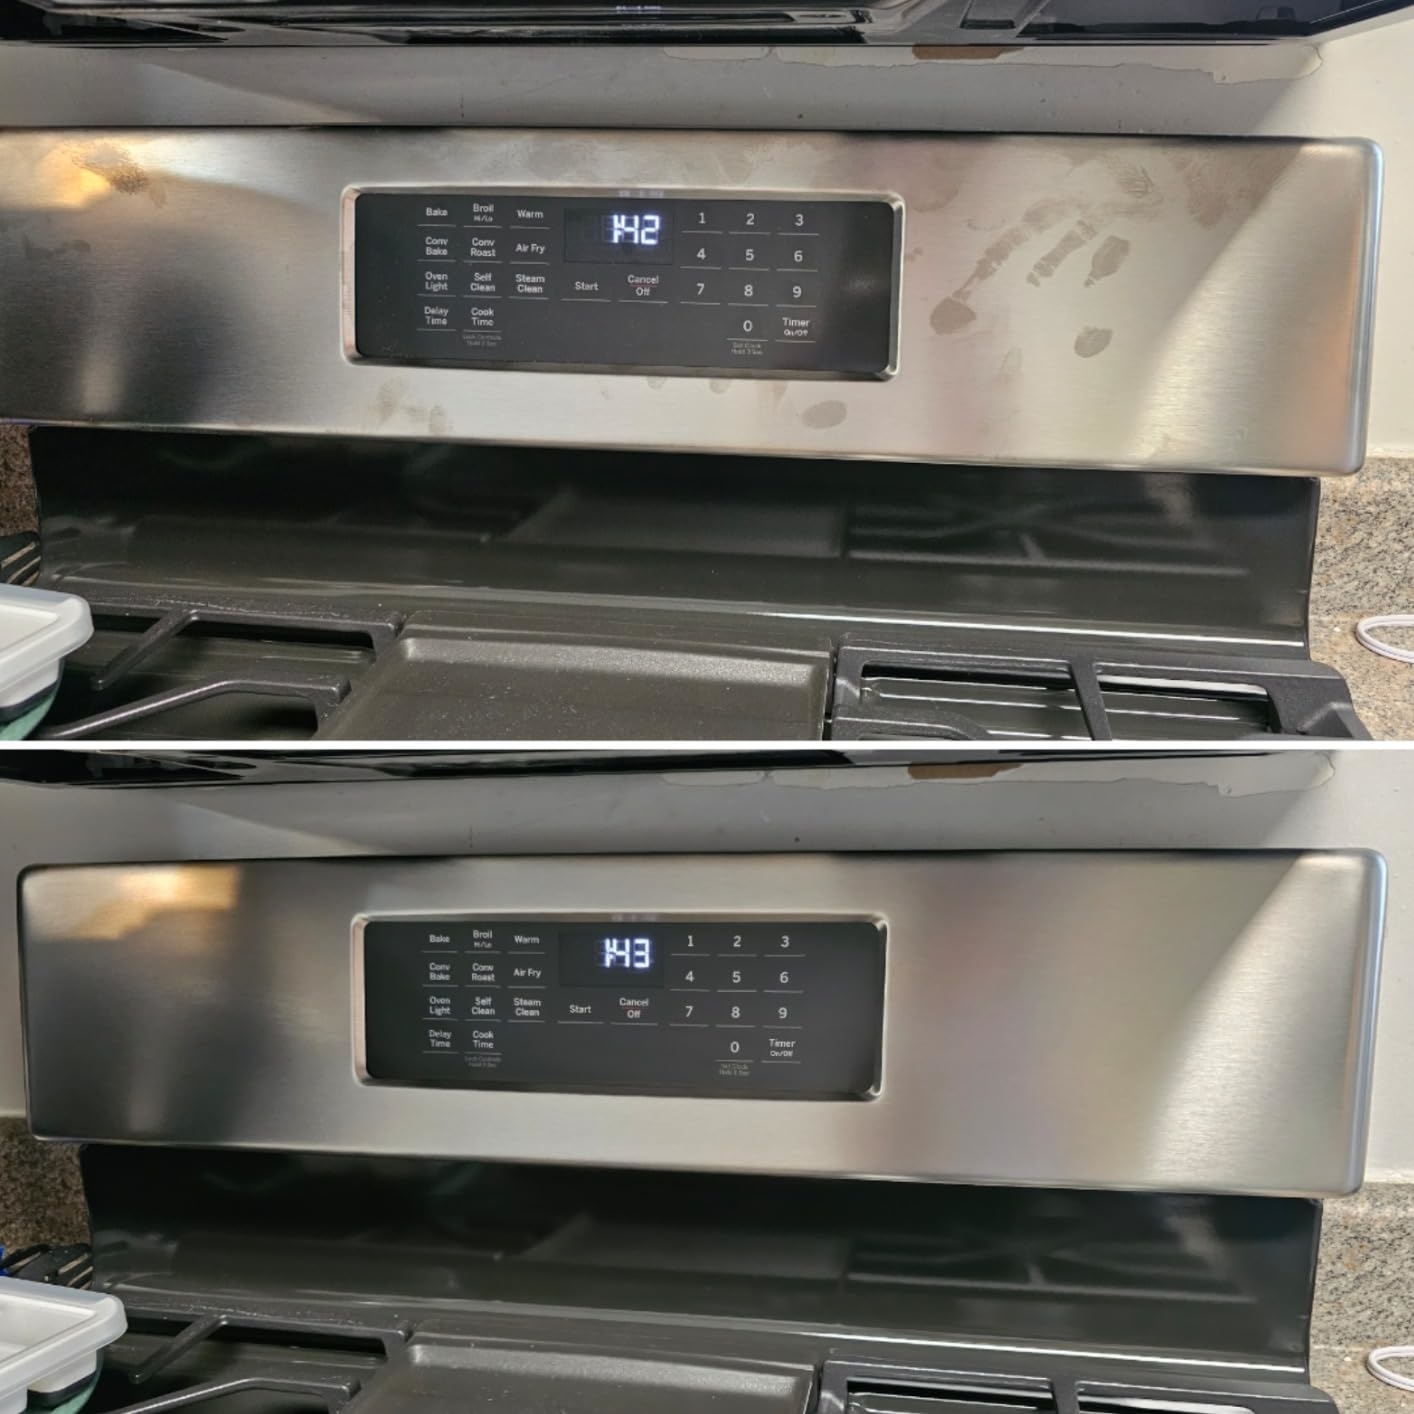 Reviewer image of their stainless steel stove before and after using the cleaning wipes